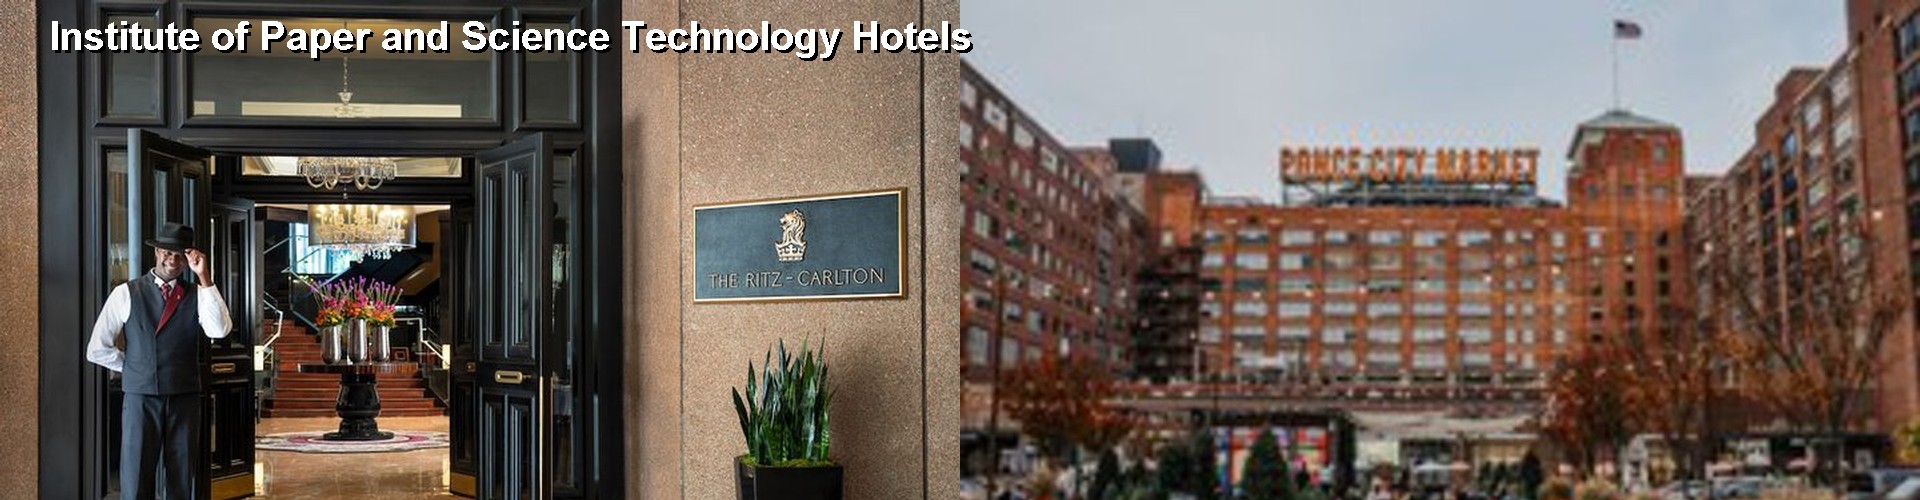 4 Best Hotels near Institute of Paper and Science Technology